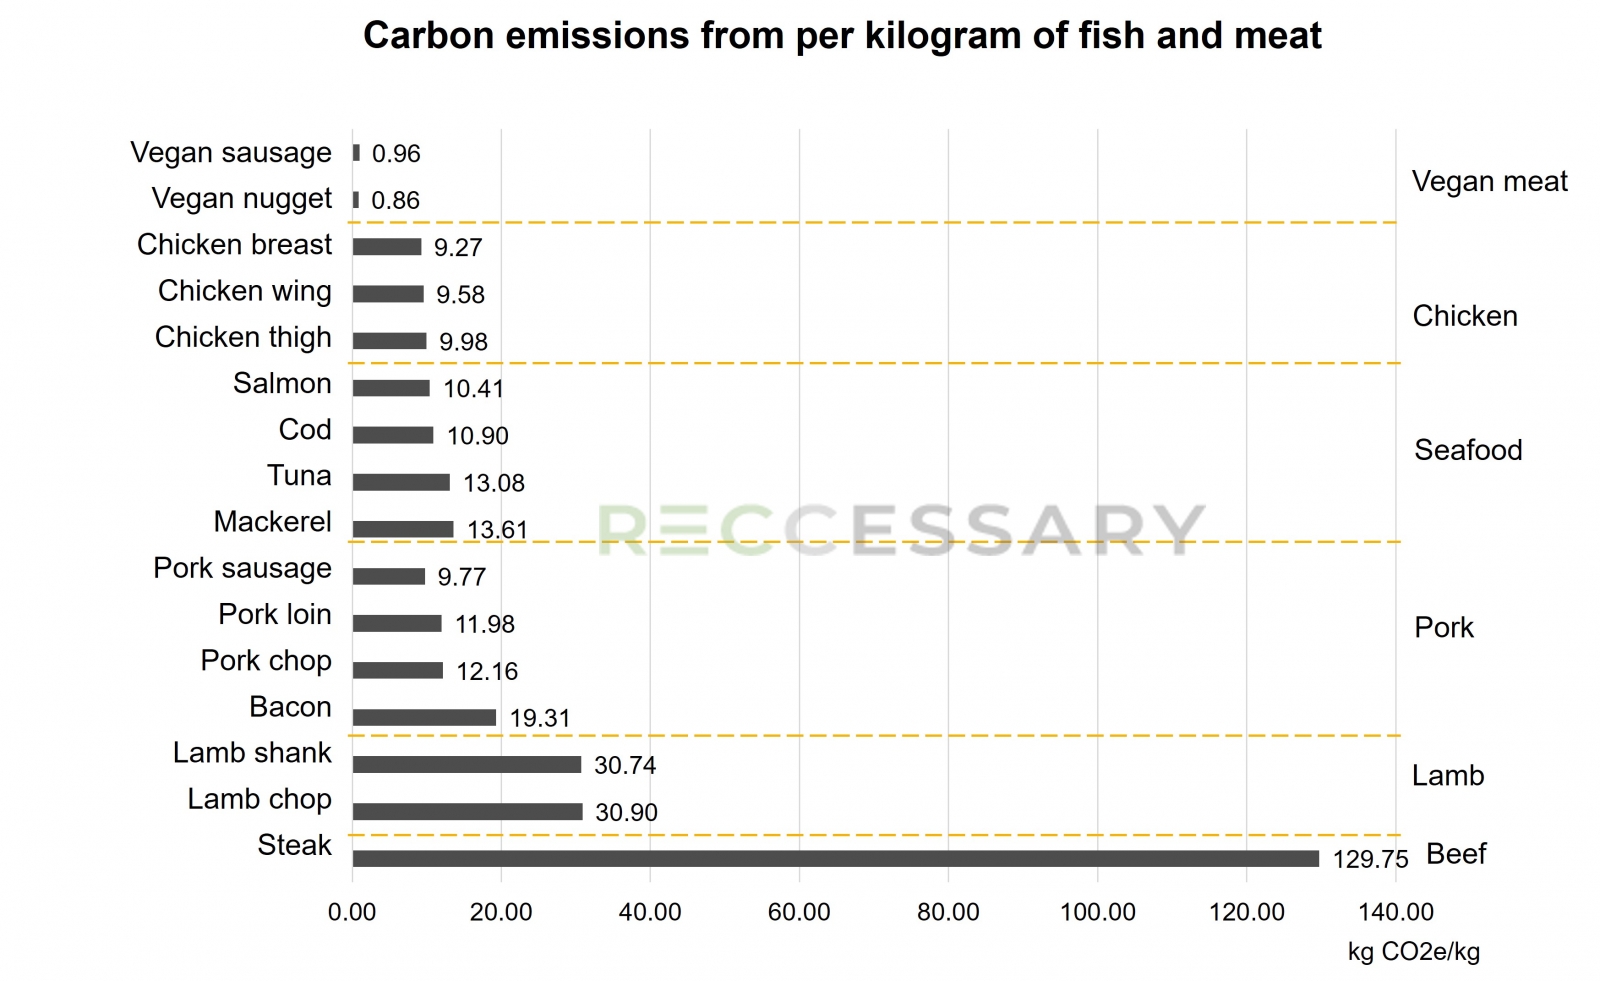 Carbon emissions from per kilogram of fish and meat